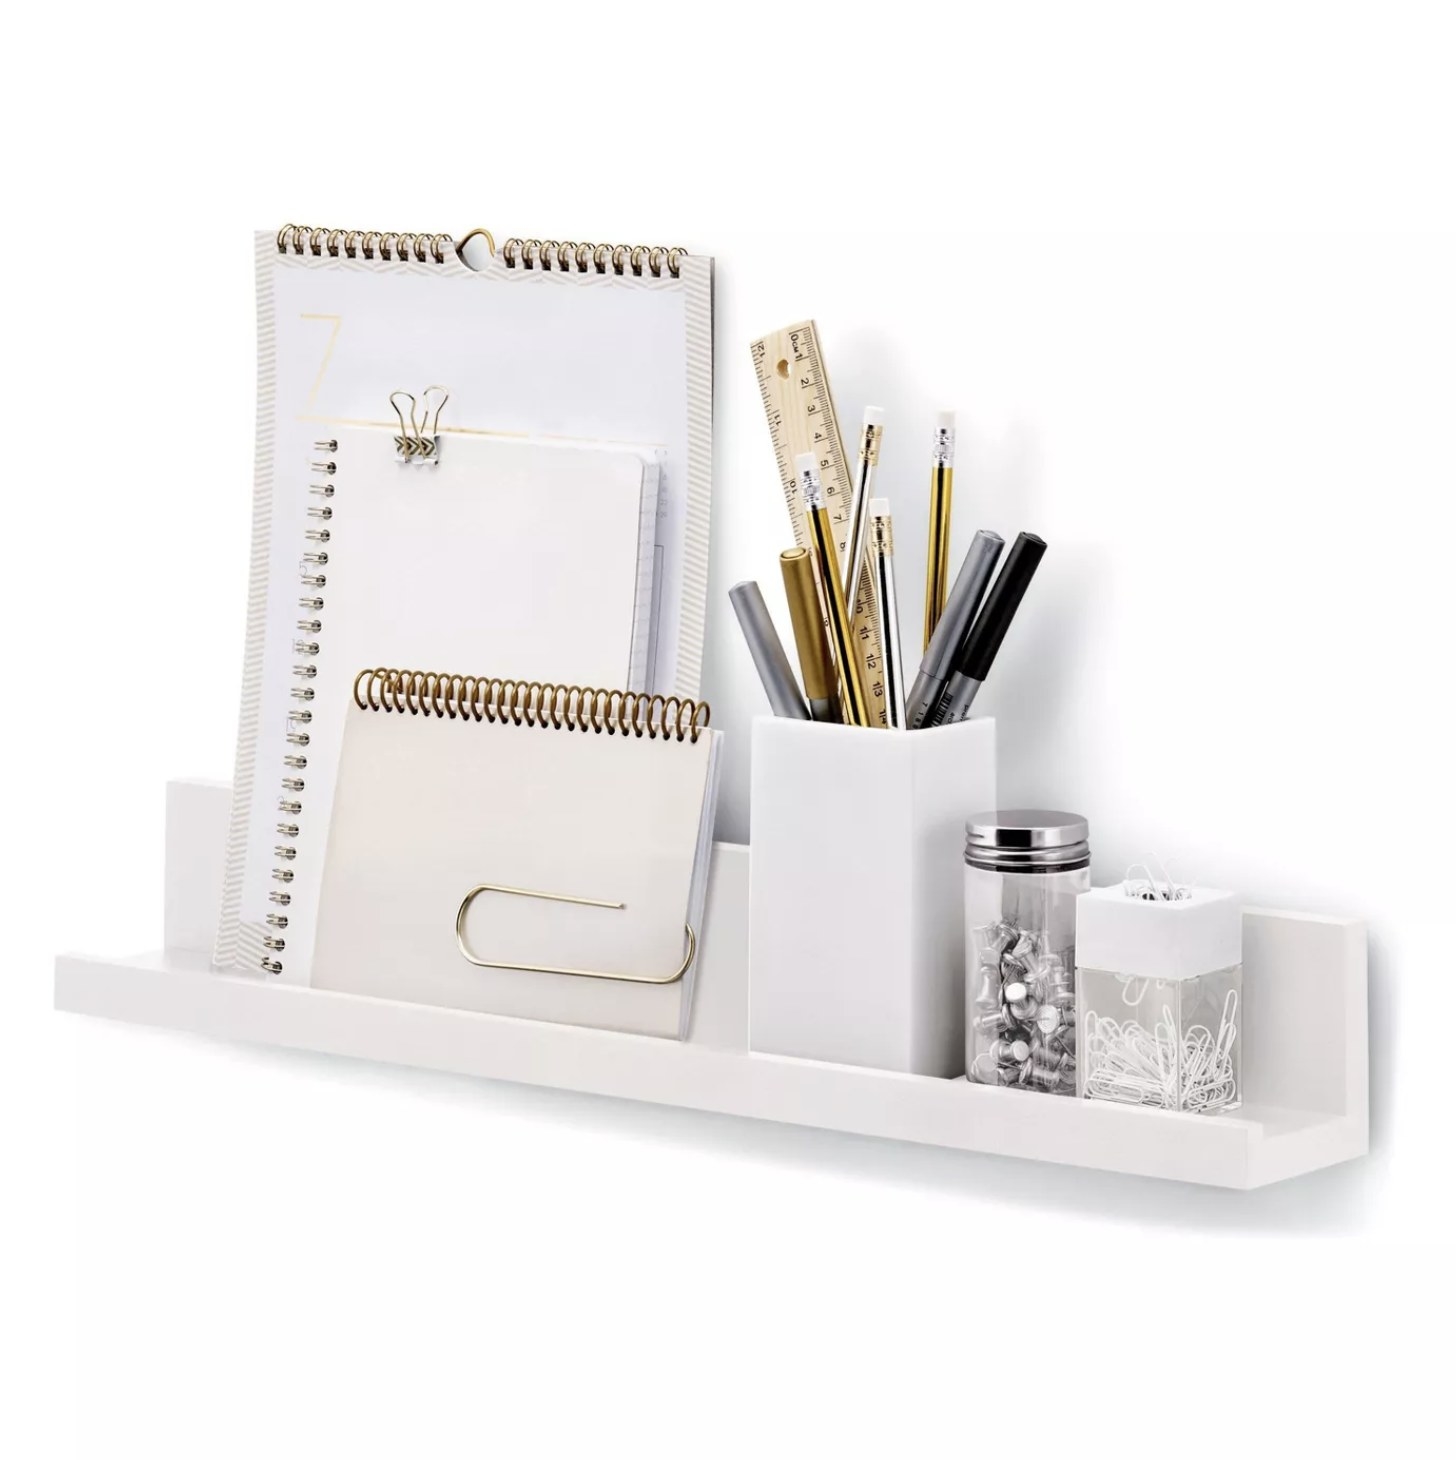 A white picture ledge holding notebooks, a cup of pens and pencils, a jar of pins, and a container of paper clips